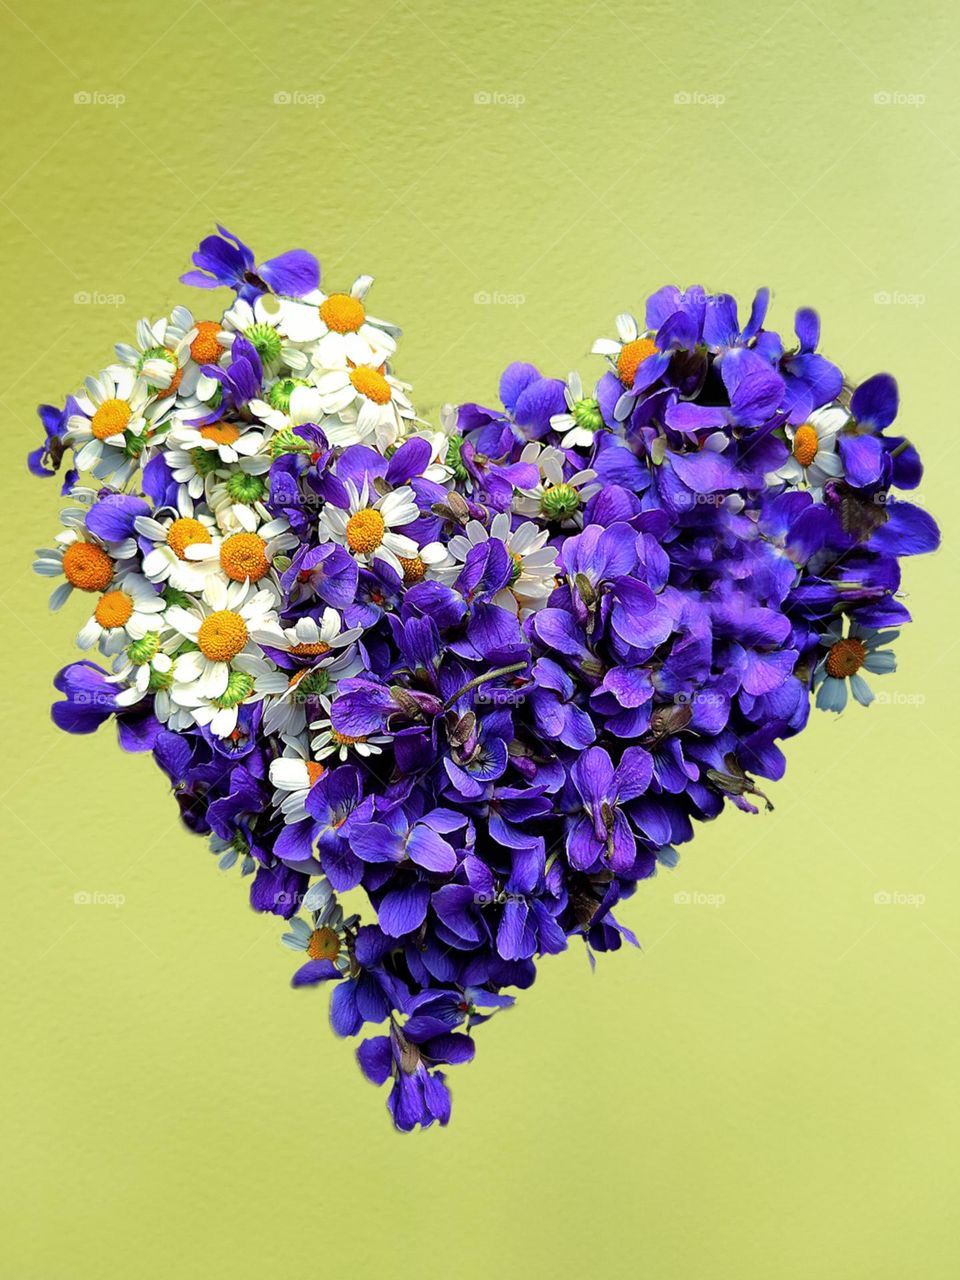 Spring has sprung. Wildflowers. Heart of purple field violet flowers and white chamomile flowers. Background yellow